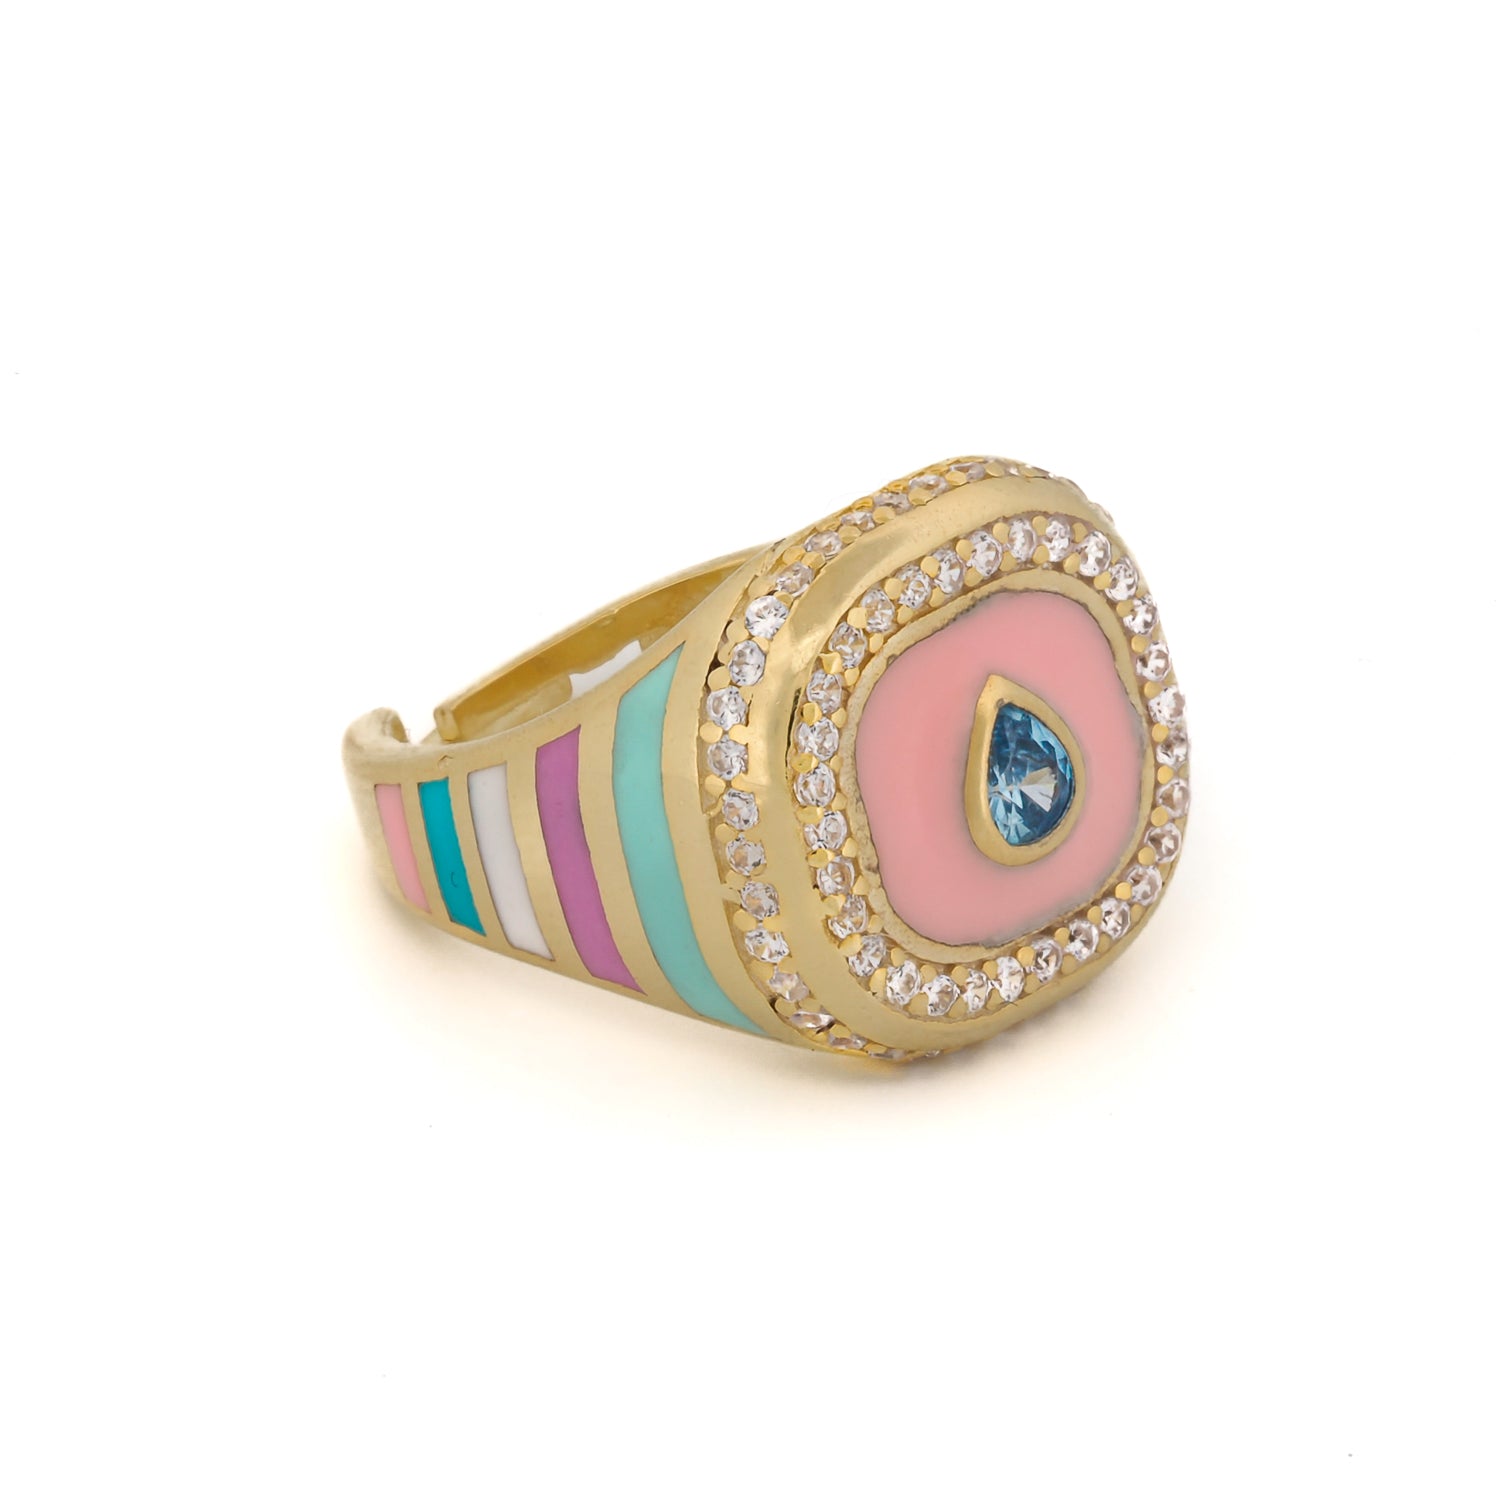 Delicate Hues and Vibrant Life in Love Spring Statement Ring